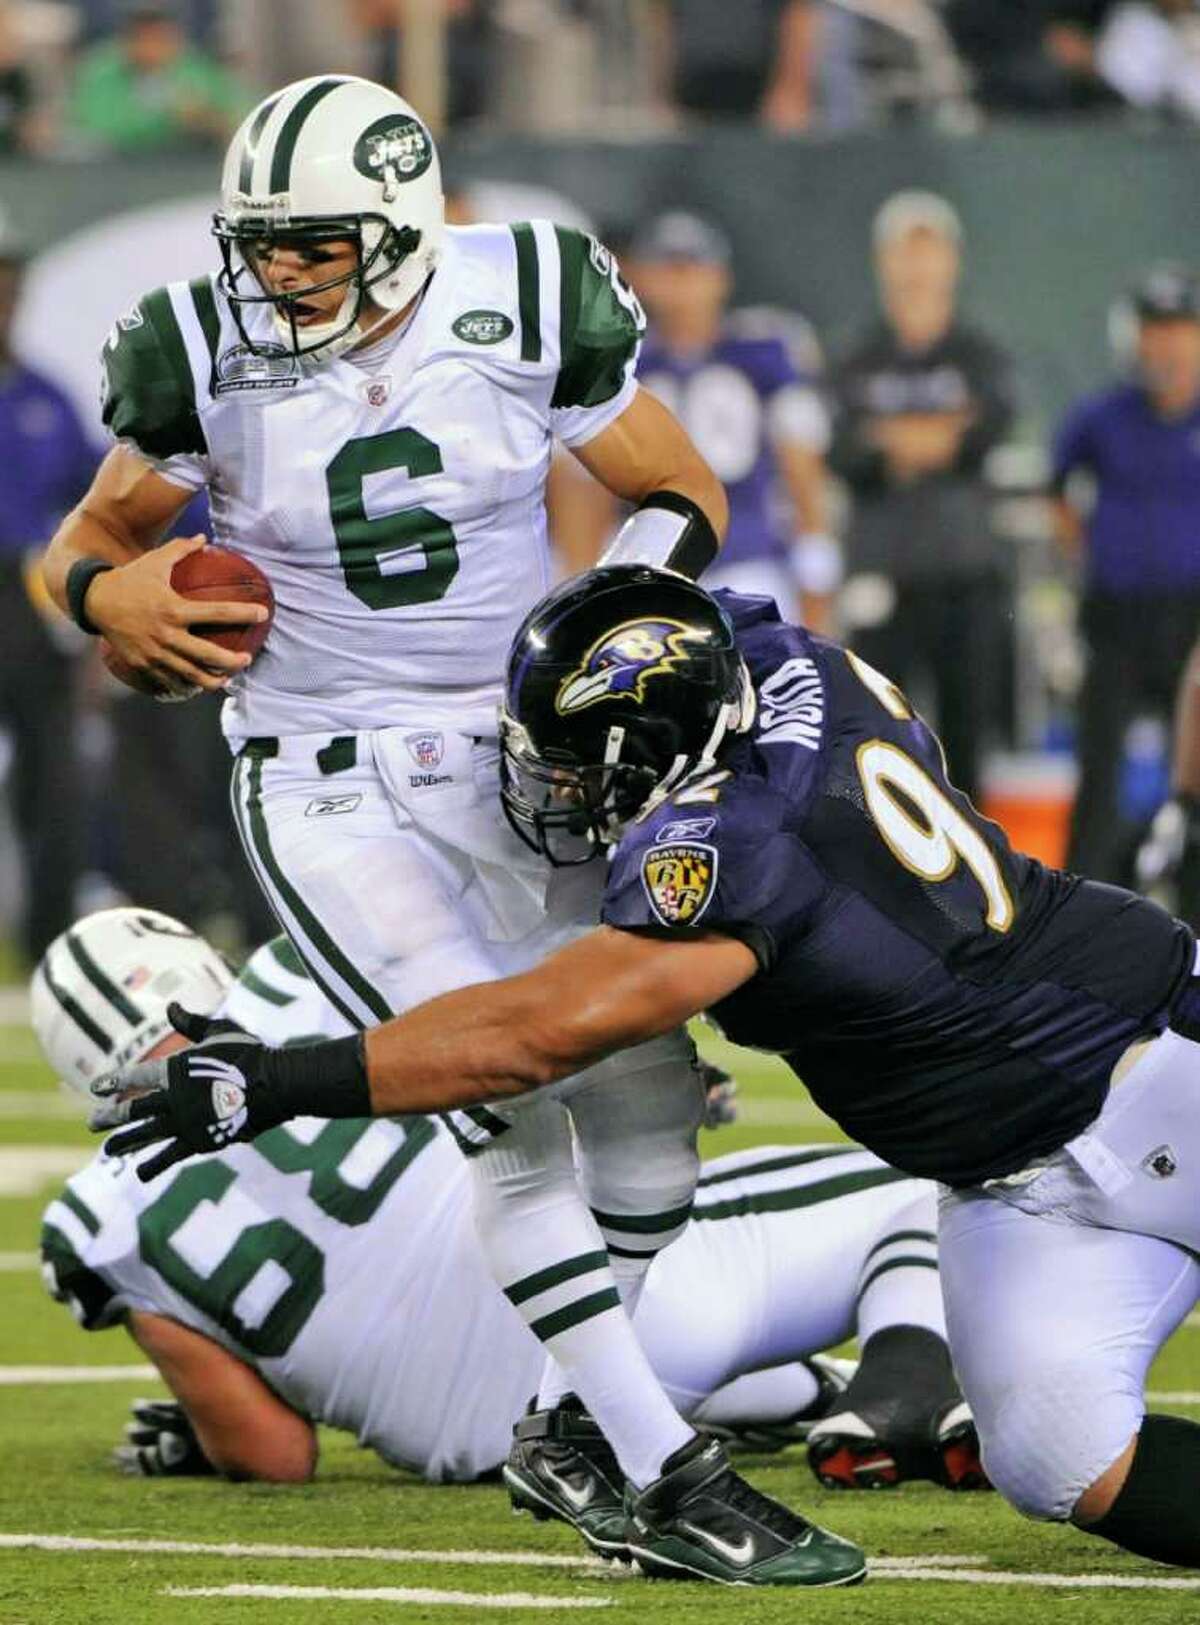 Baltimore Ravens defensive tackle Haloti Ngata (92) sacks New York Jets quarterback Mark Sanchez (6) during the fourth quarter of an NFL football game at New Meadowlands Stadium in East Rutherford, N.J., Monday, Sept. 13, 2010. The Ravens won 10-9. (AP Photo/Bill Kostroun)